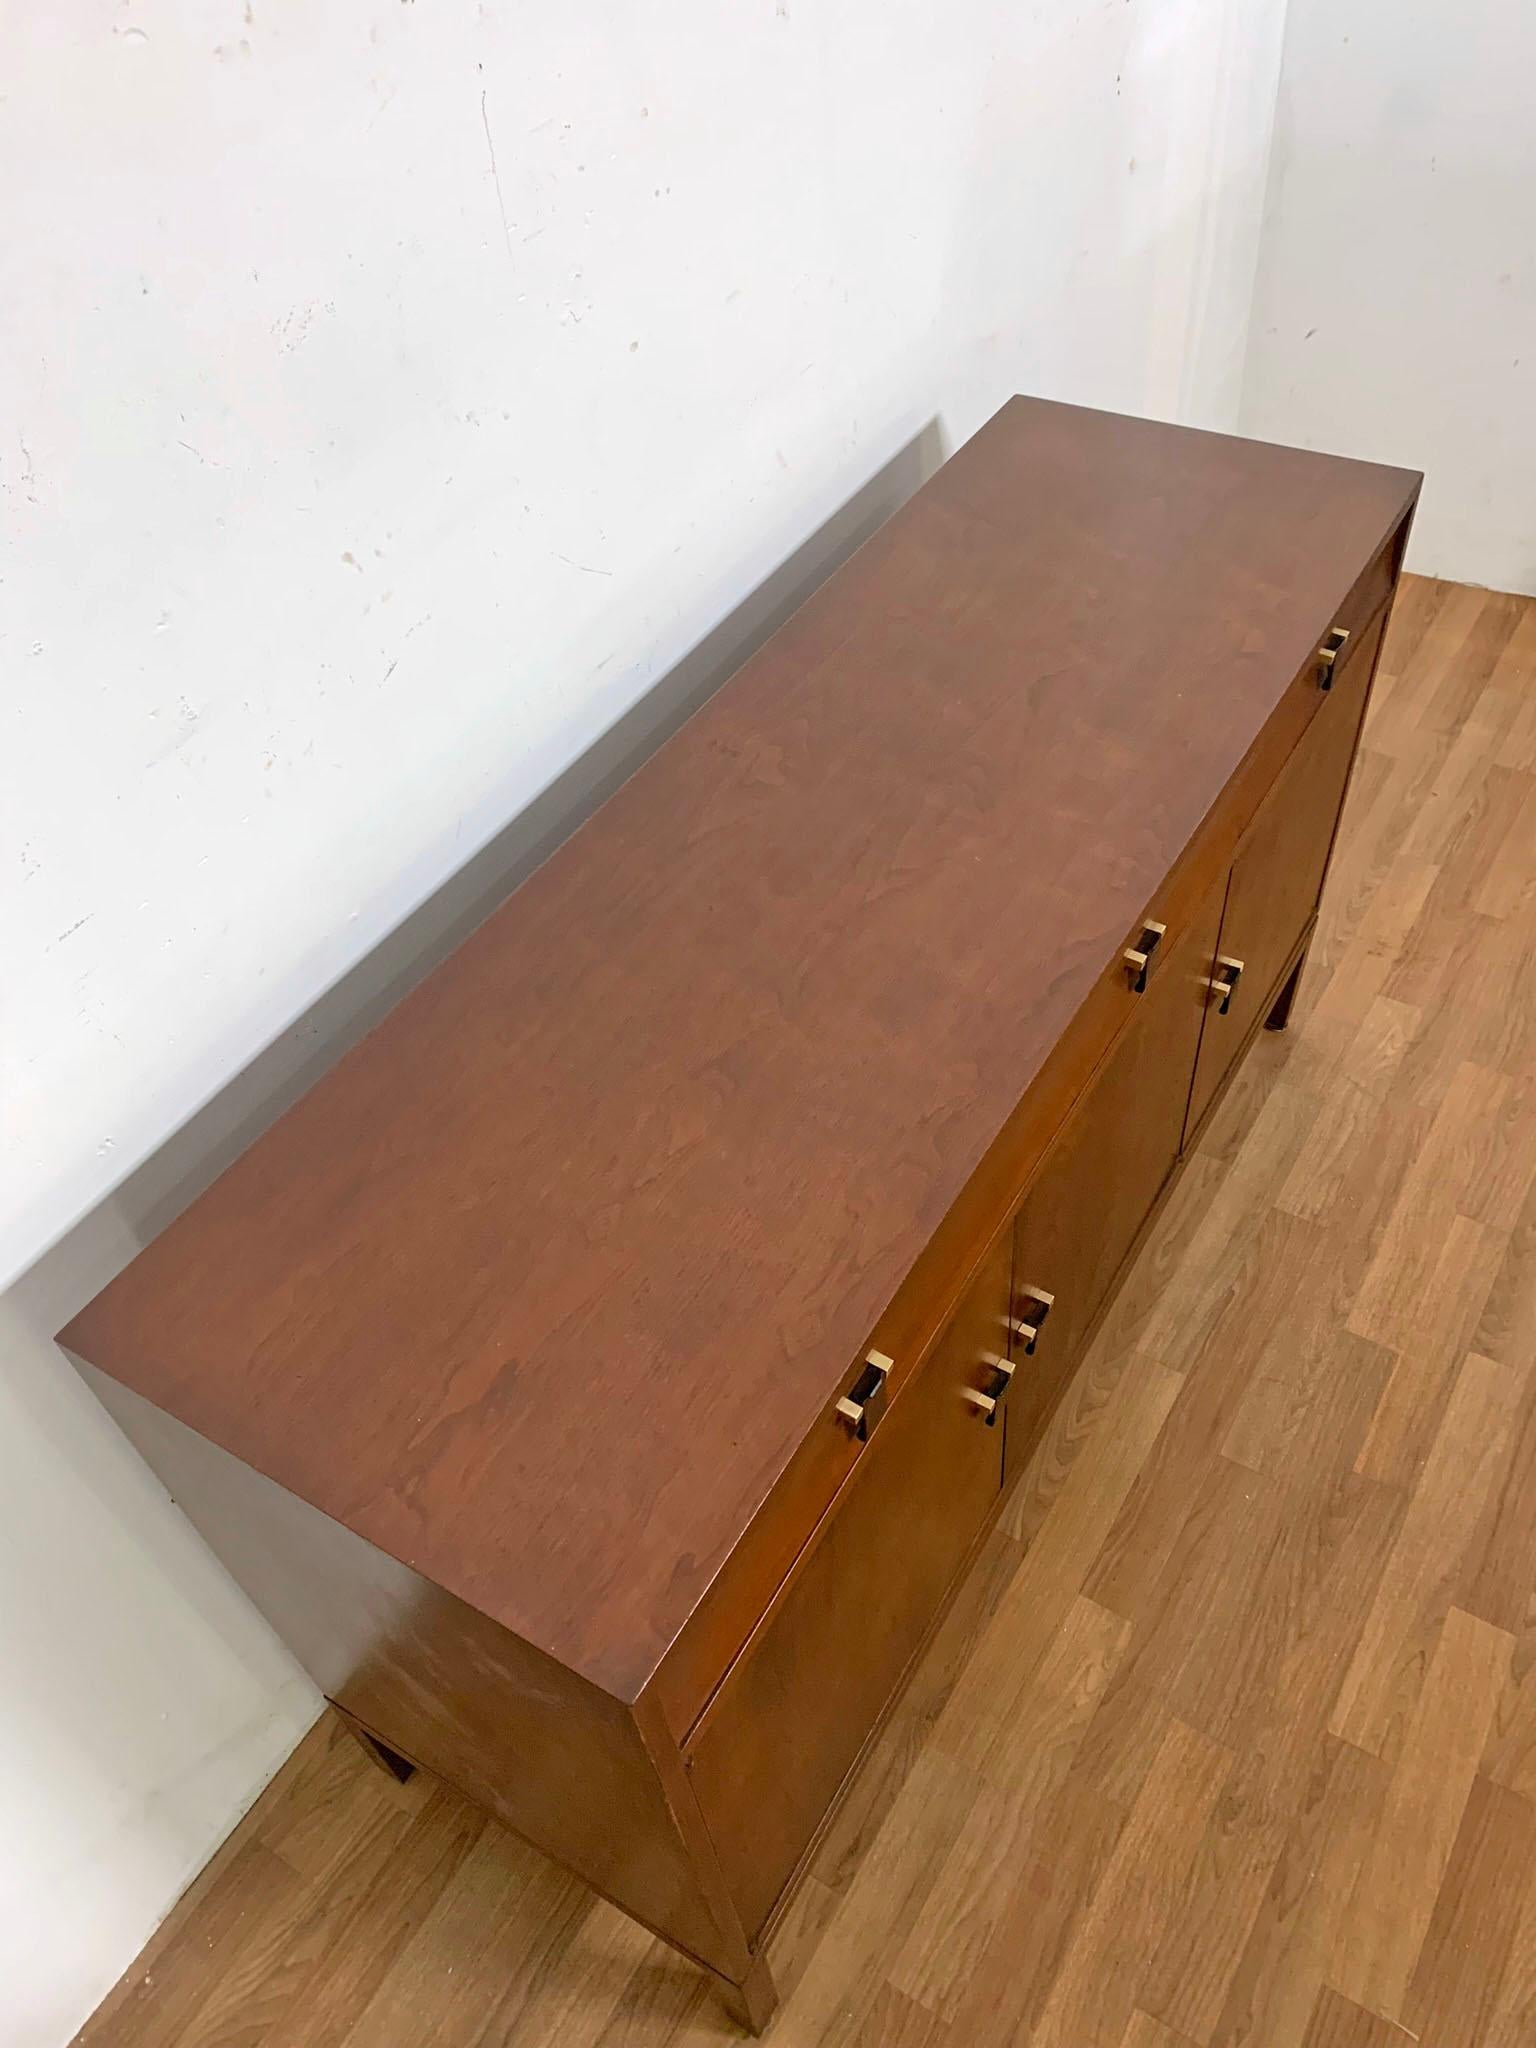 Brass Edward Wormley for Dunbar Mahogany Credenza with Rosewood Pulls, circa 1950s For Sale